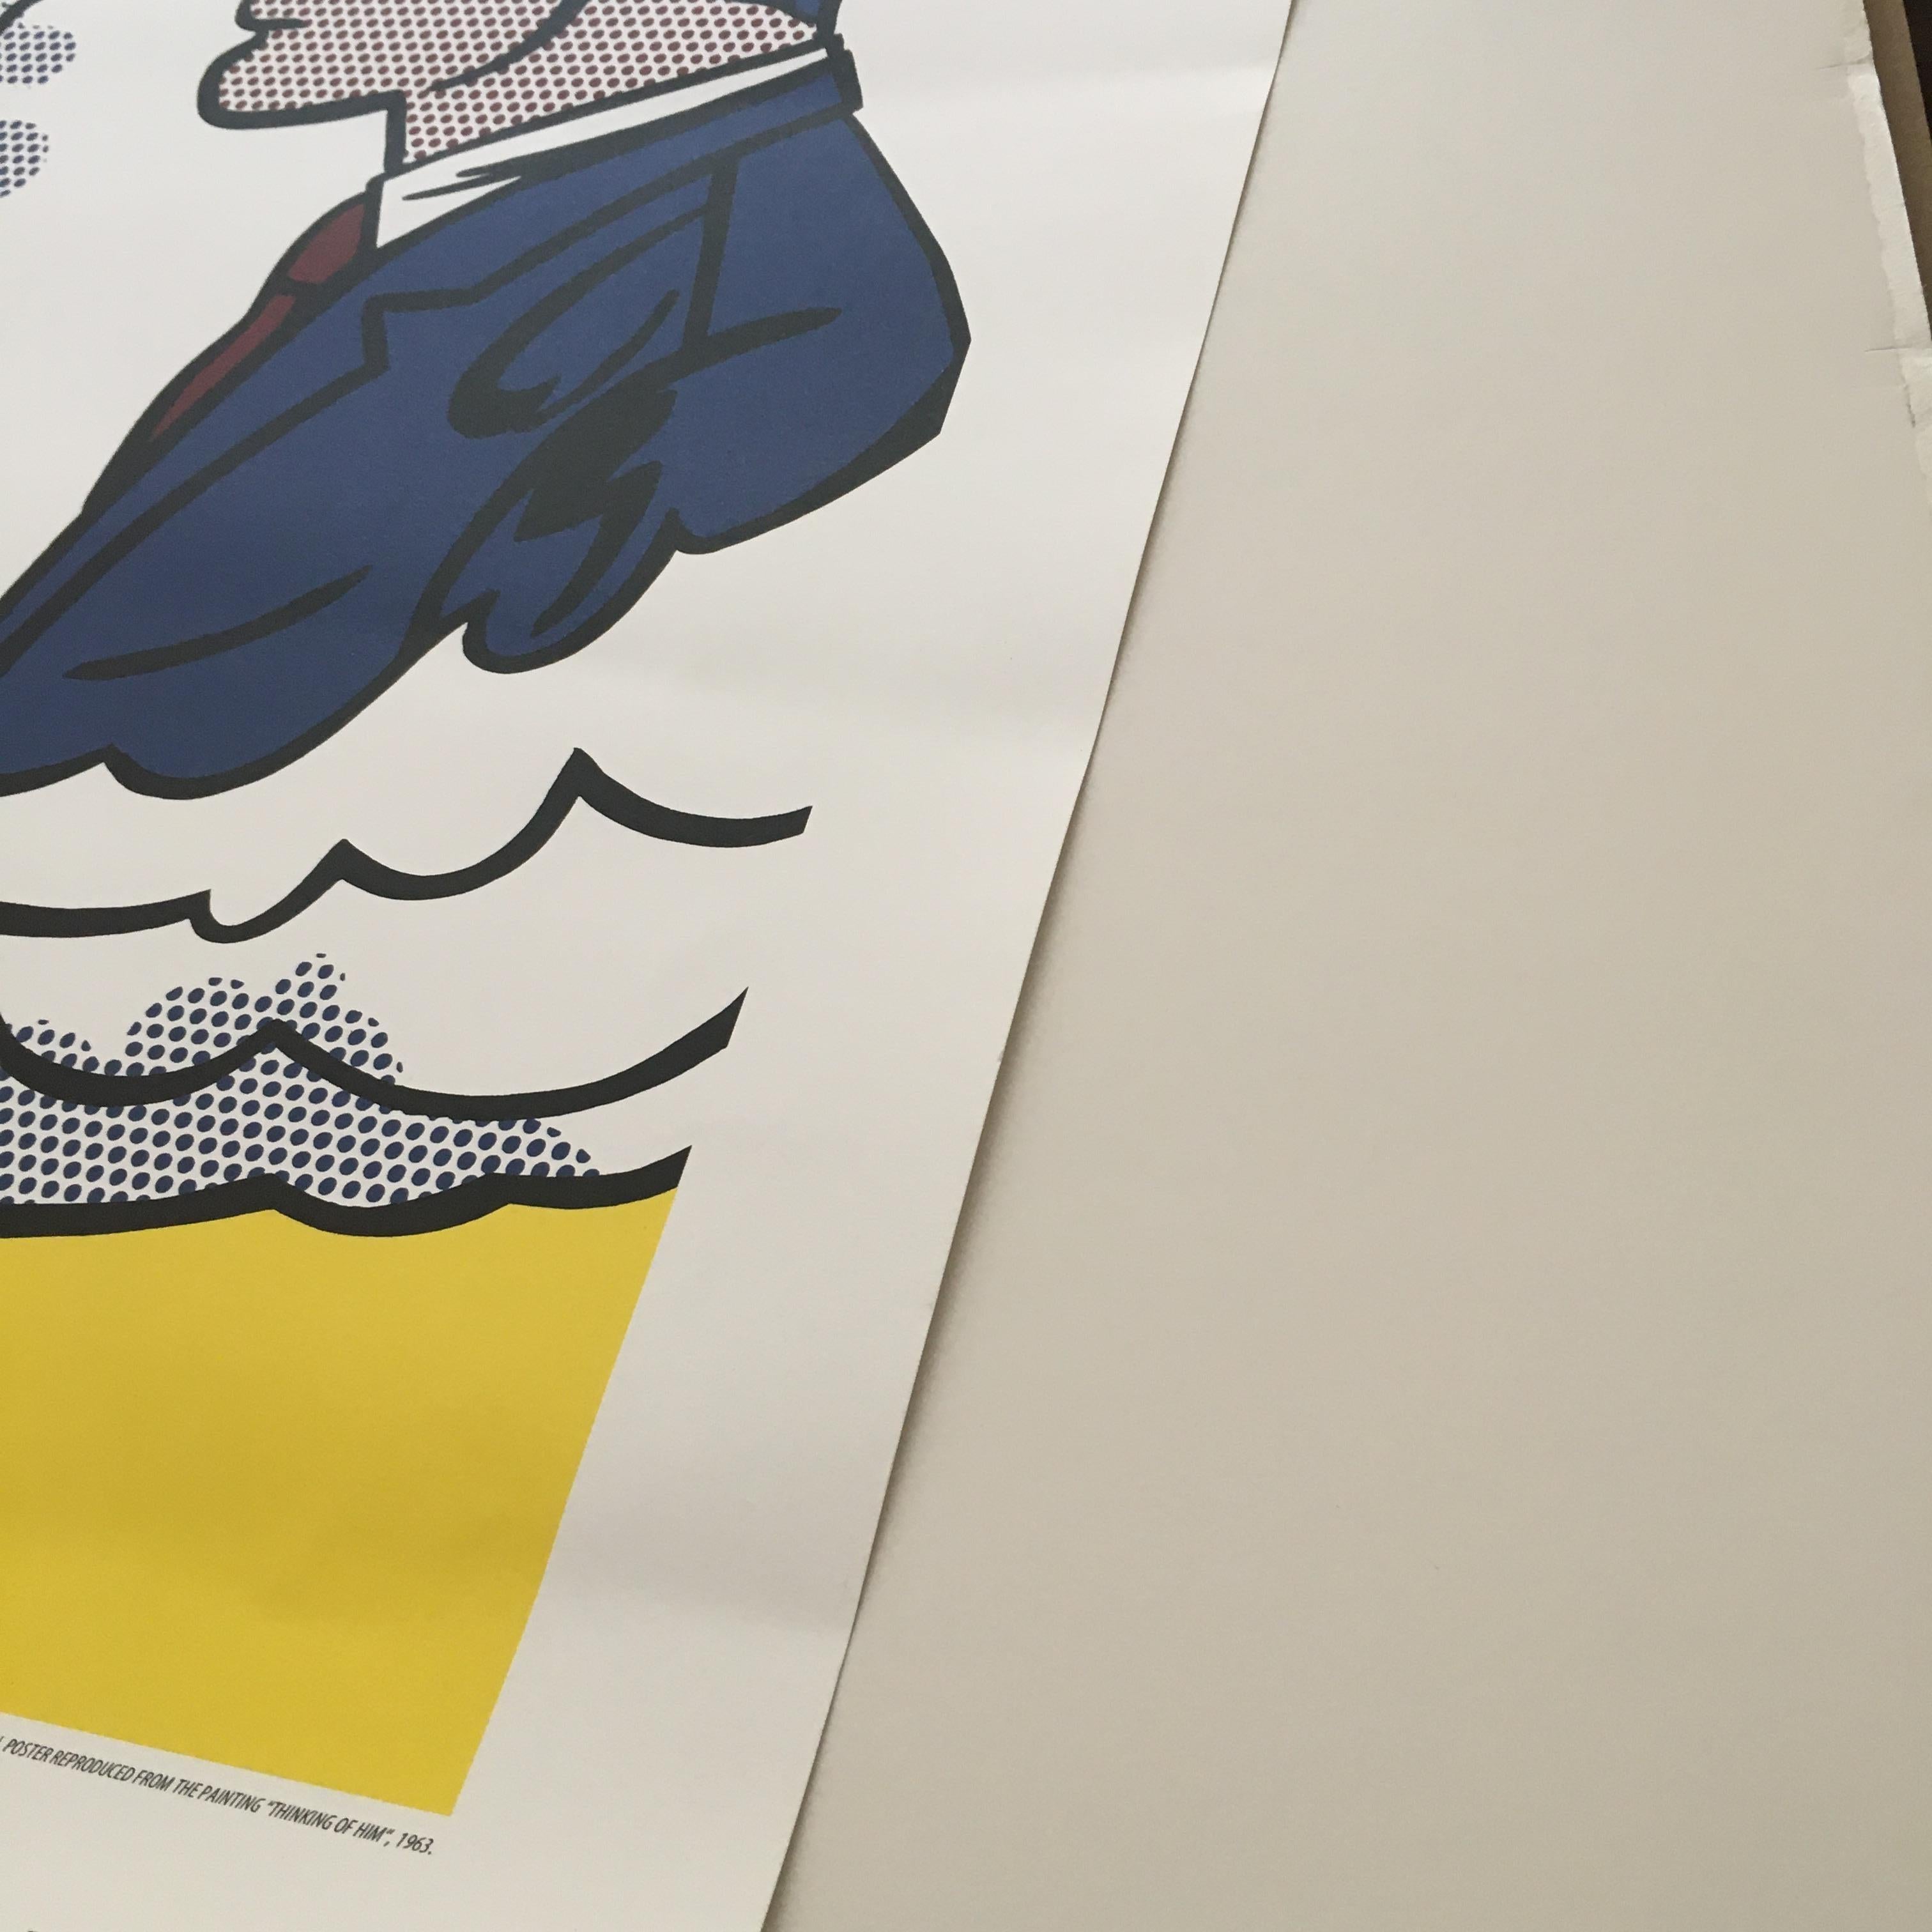 Yale University Art Gallery (Thinking of Him), Signed Poster - Beige Figurative Print by Roy Lichtenstein